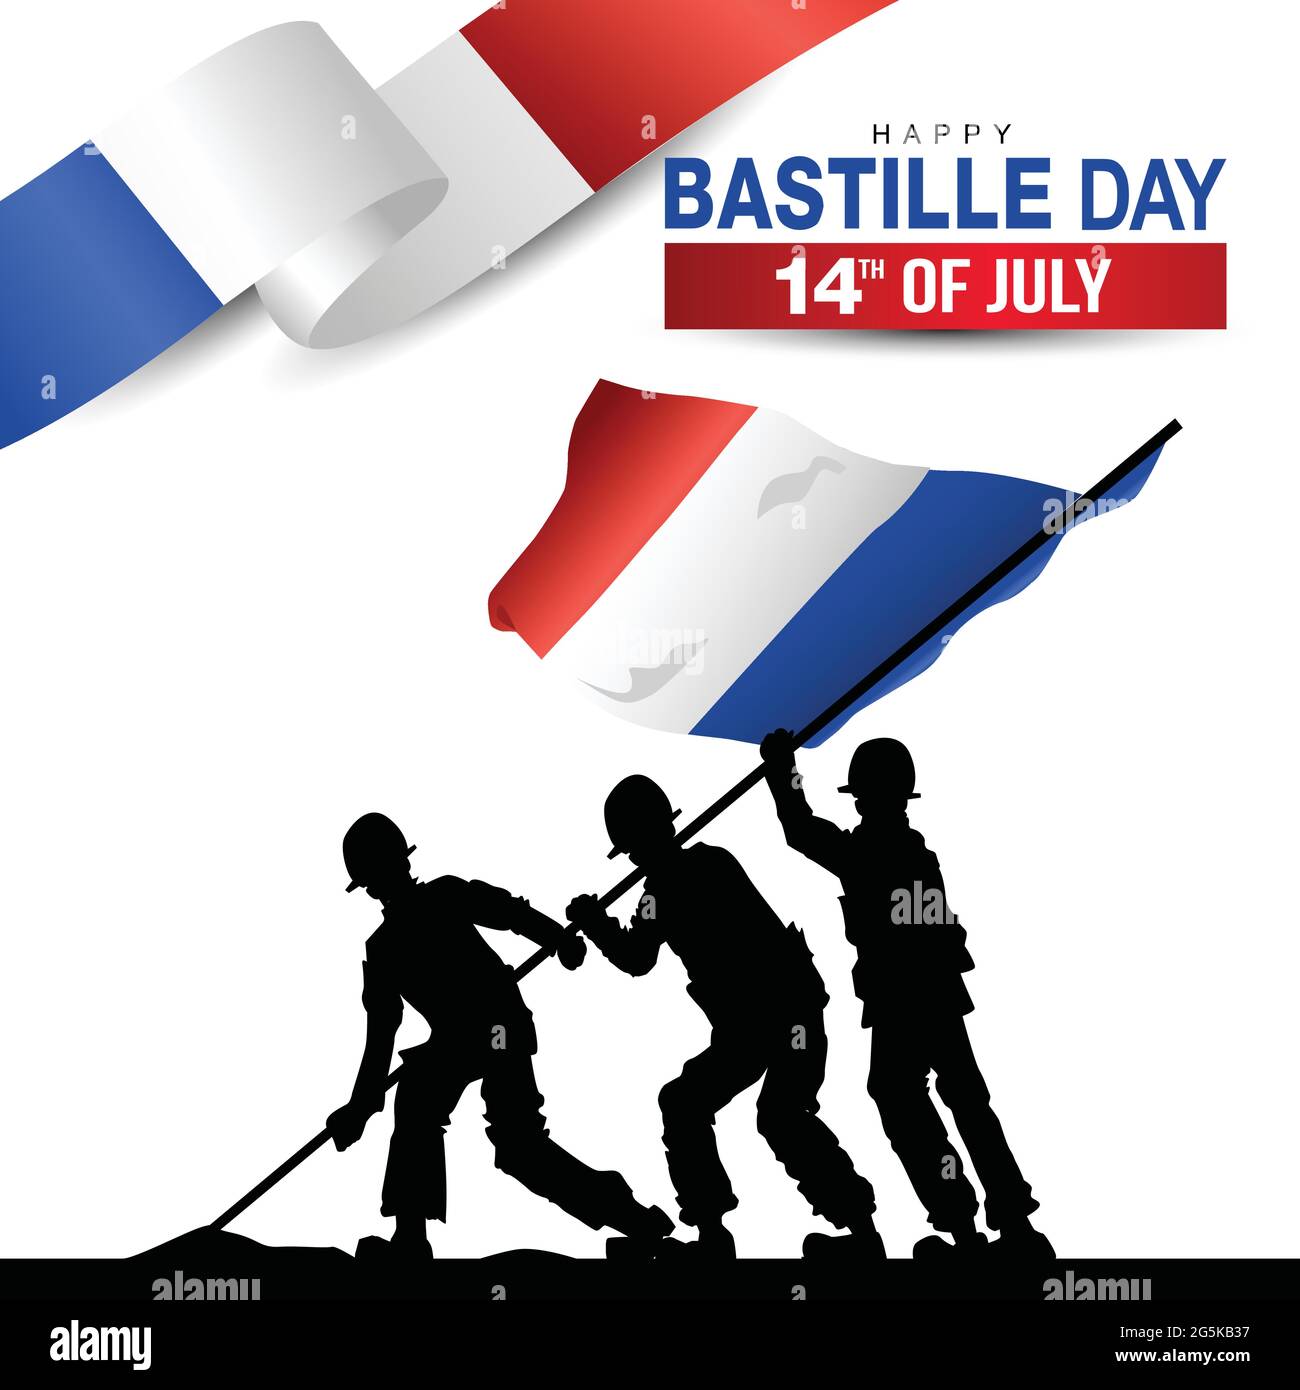 Happy bastille day Vector Template Design Illustration. silhouette soldiers raising with flag Stock Vector